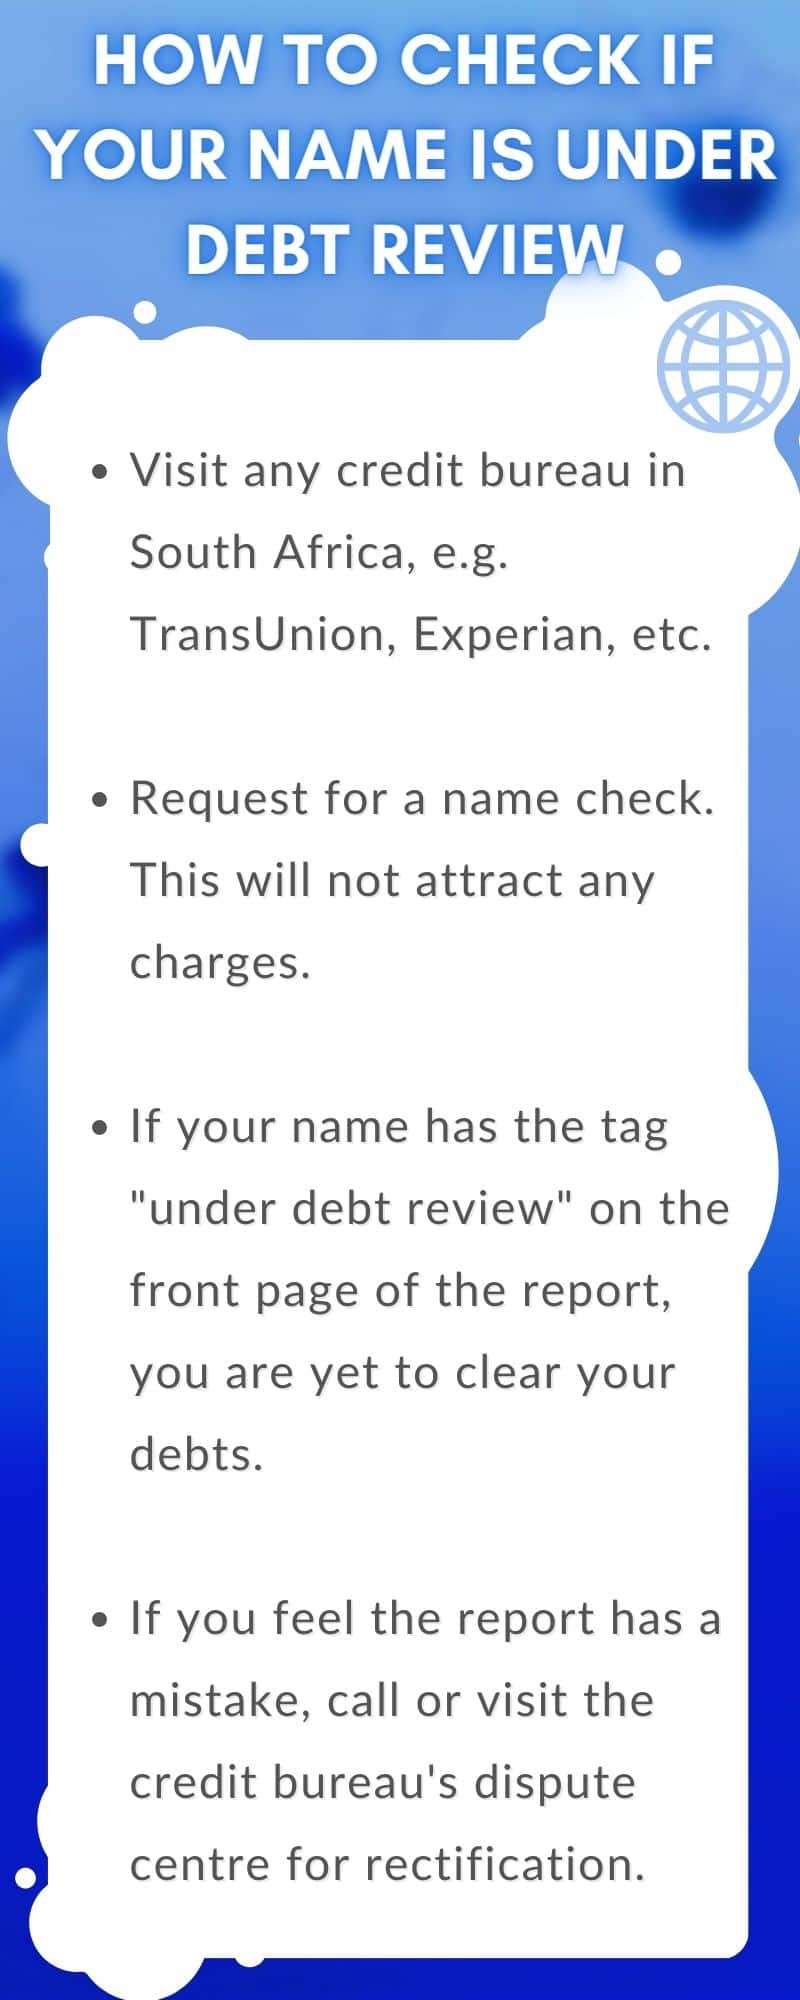 How to check if your name is under debt review